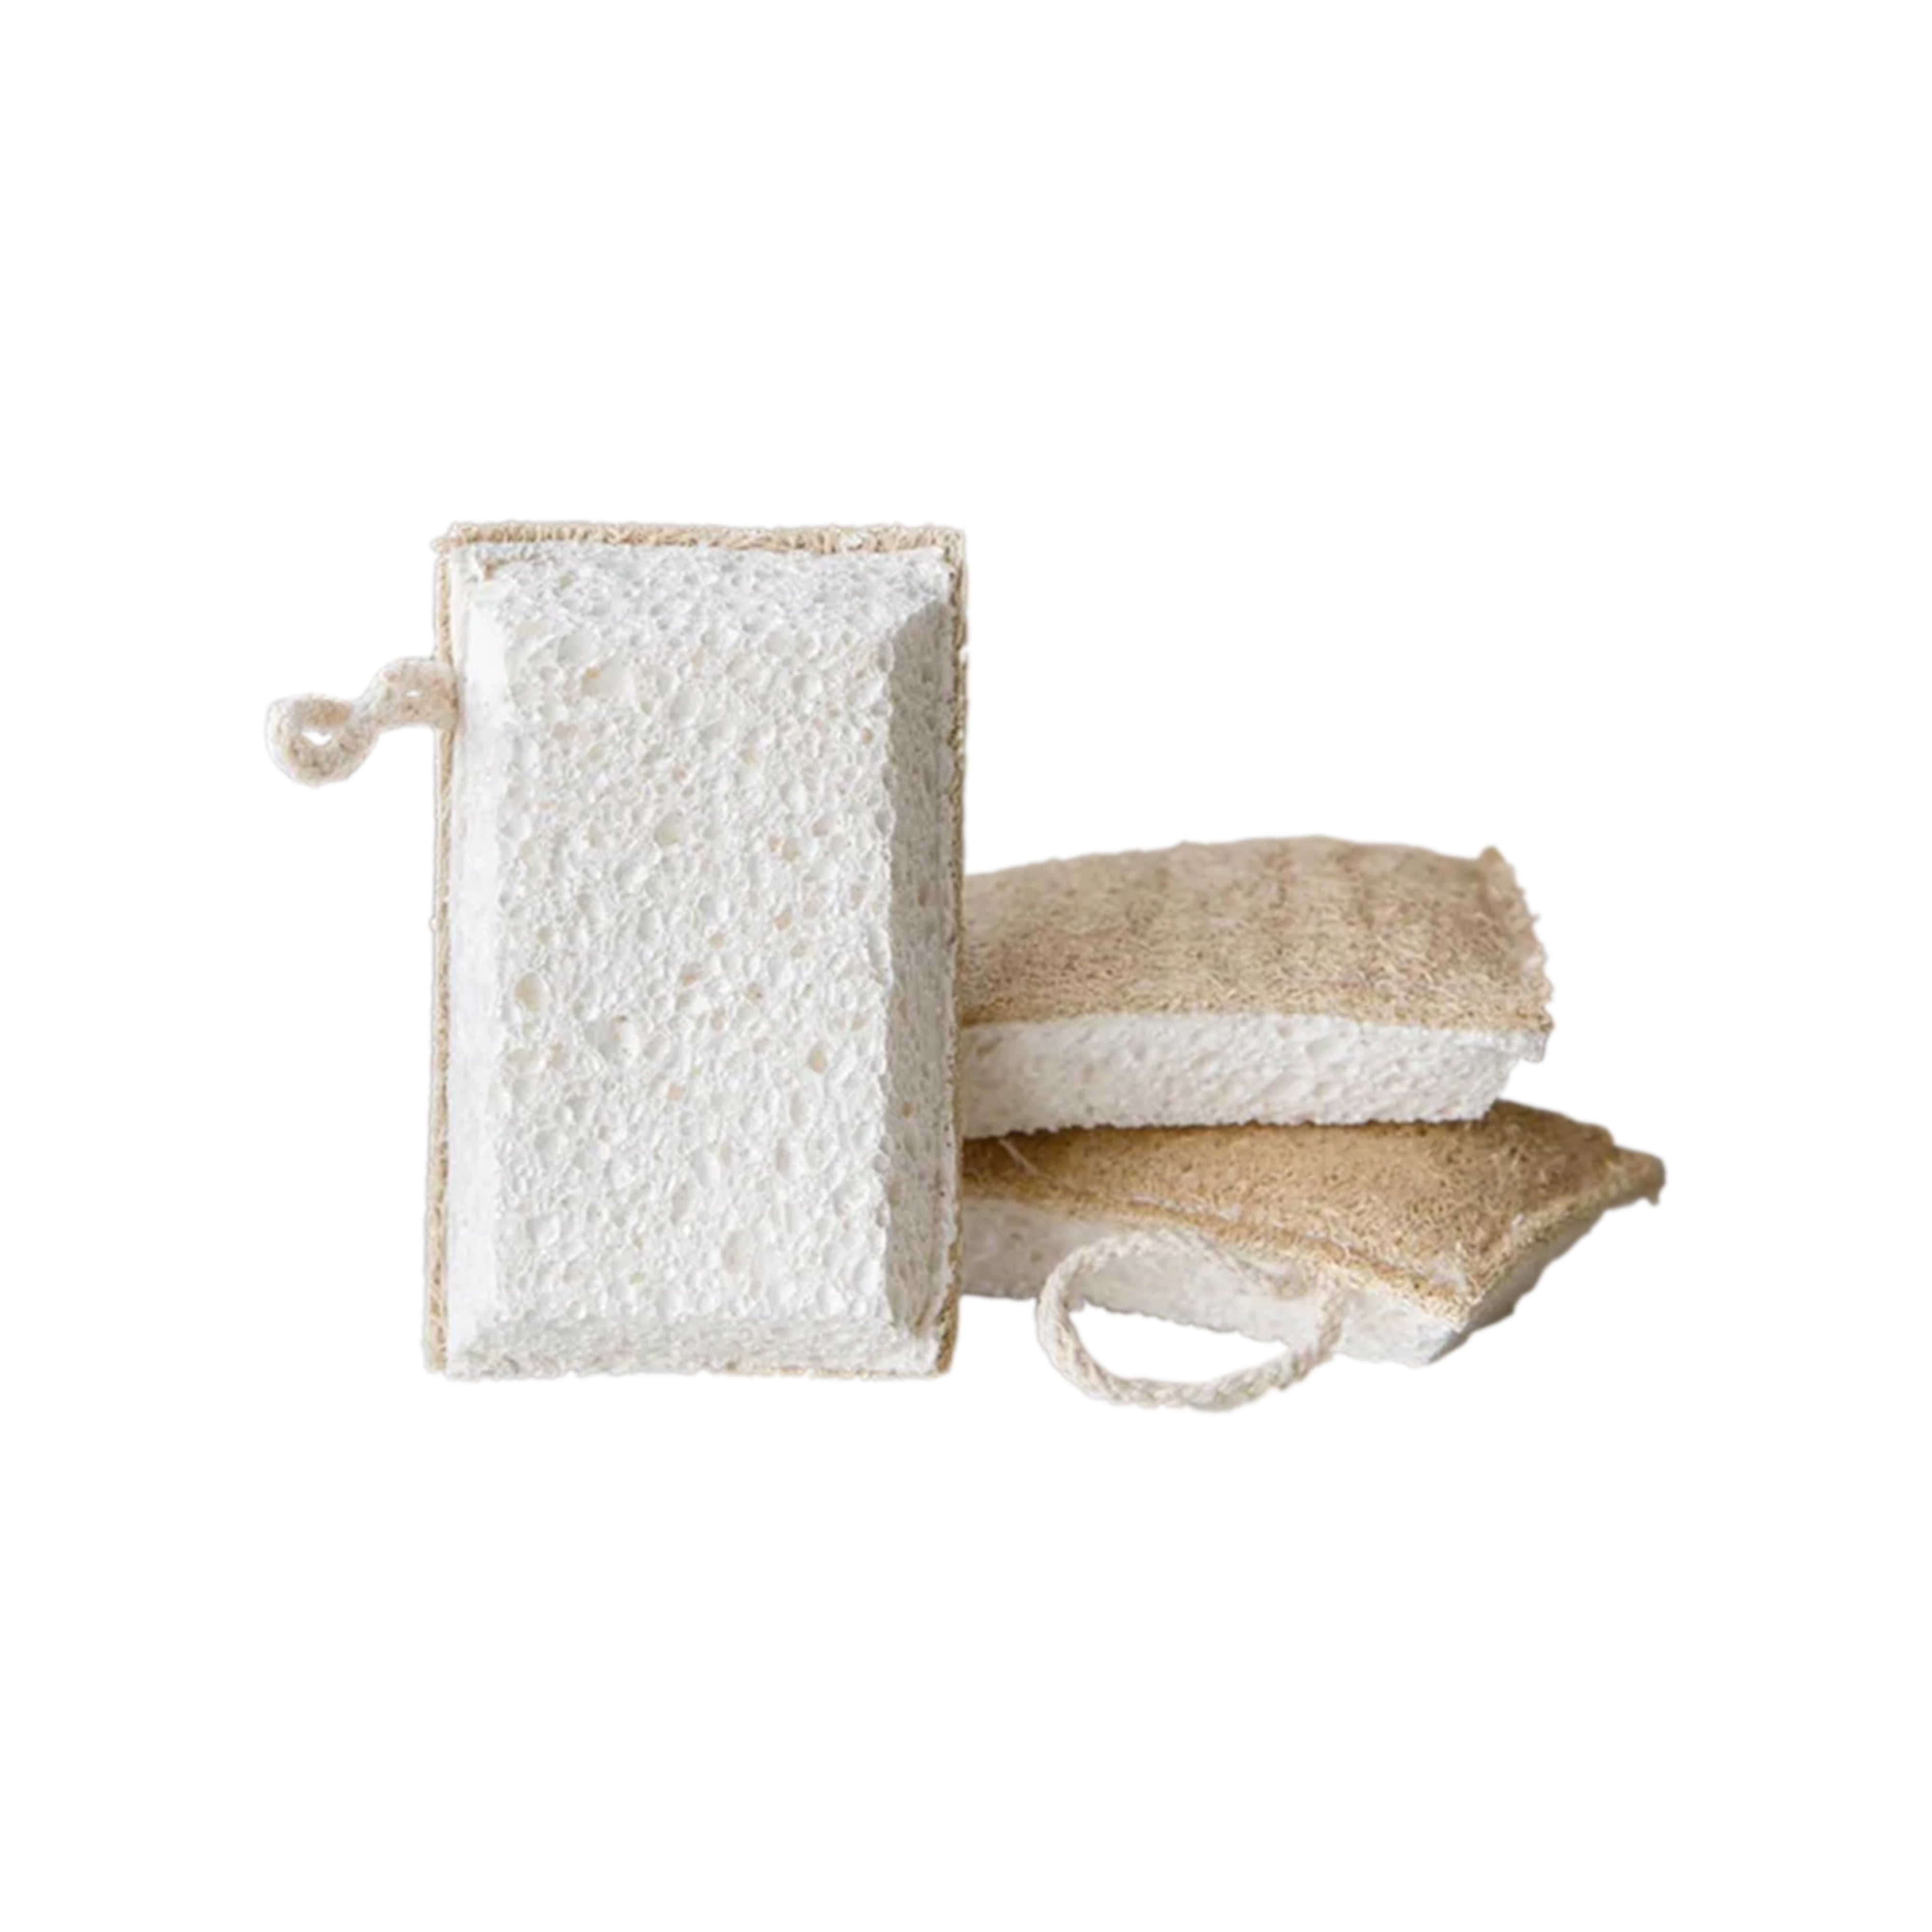 Loofah & Cellulose Cleaning Sponge